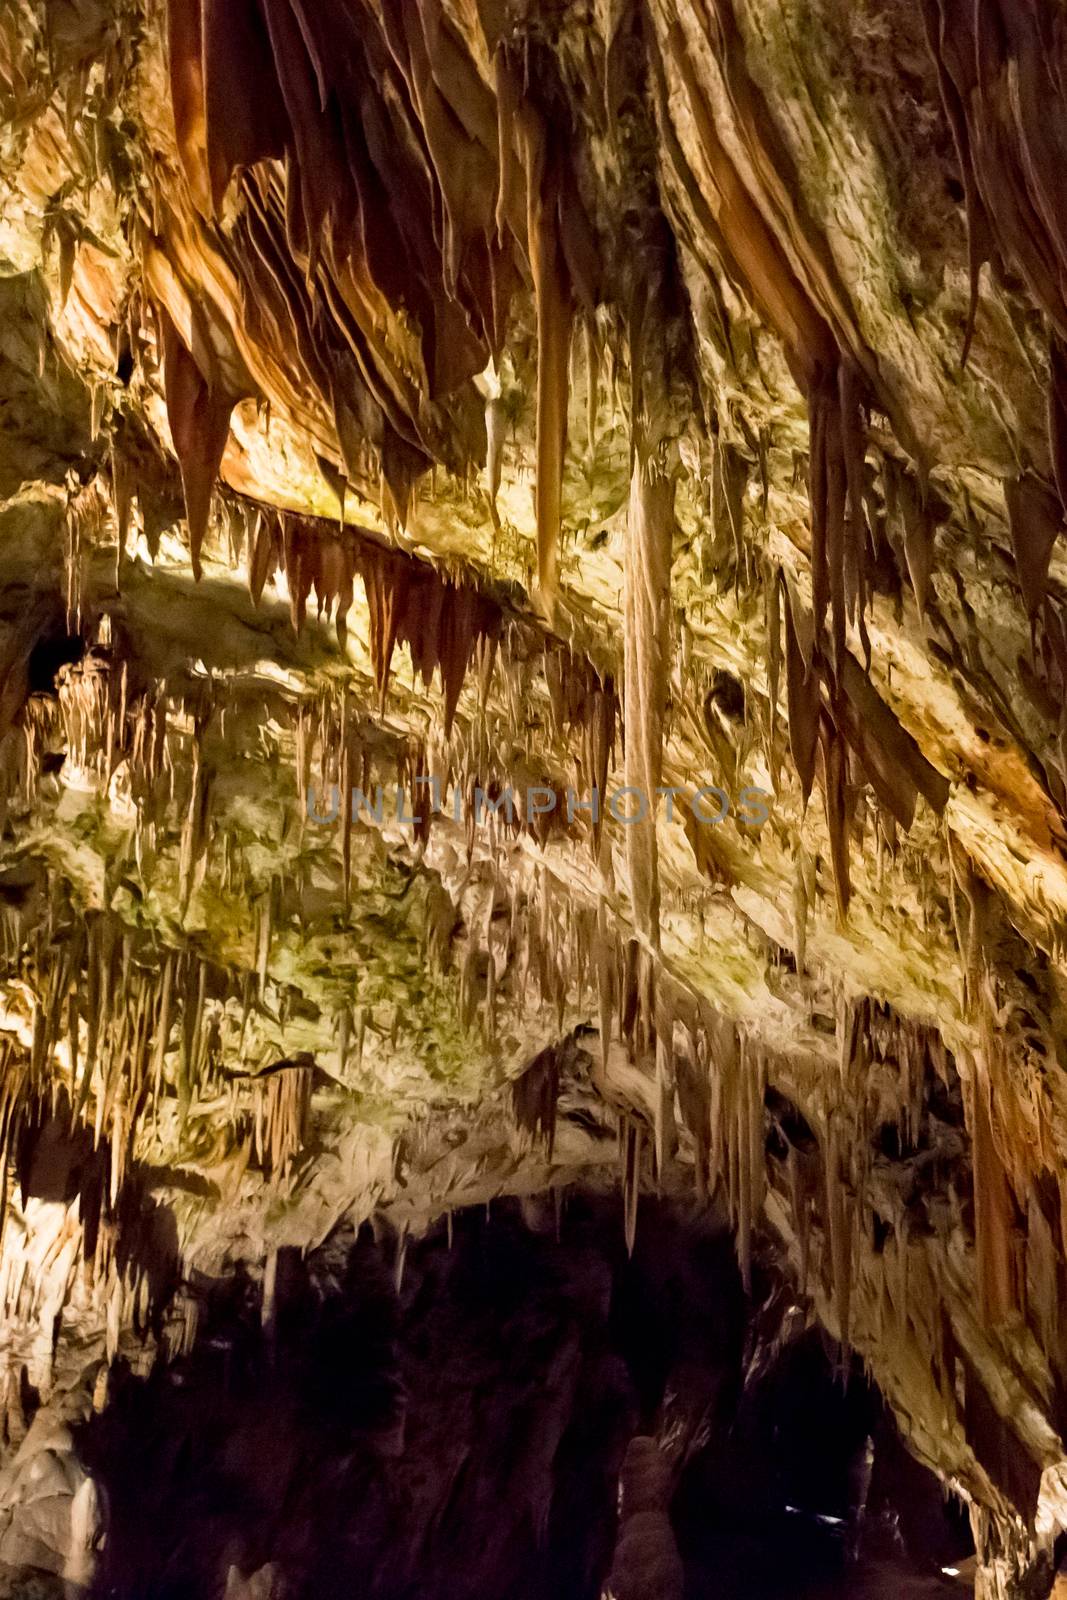 Postojna cave, Slovenia. Formations inside cave with stalactites and stalagmites by SeuMelhorClick